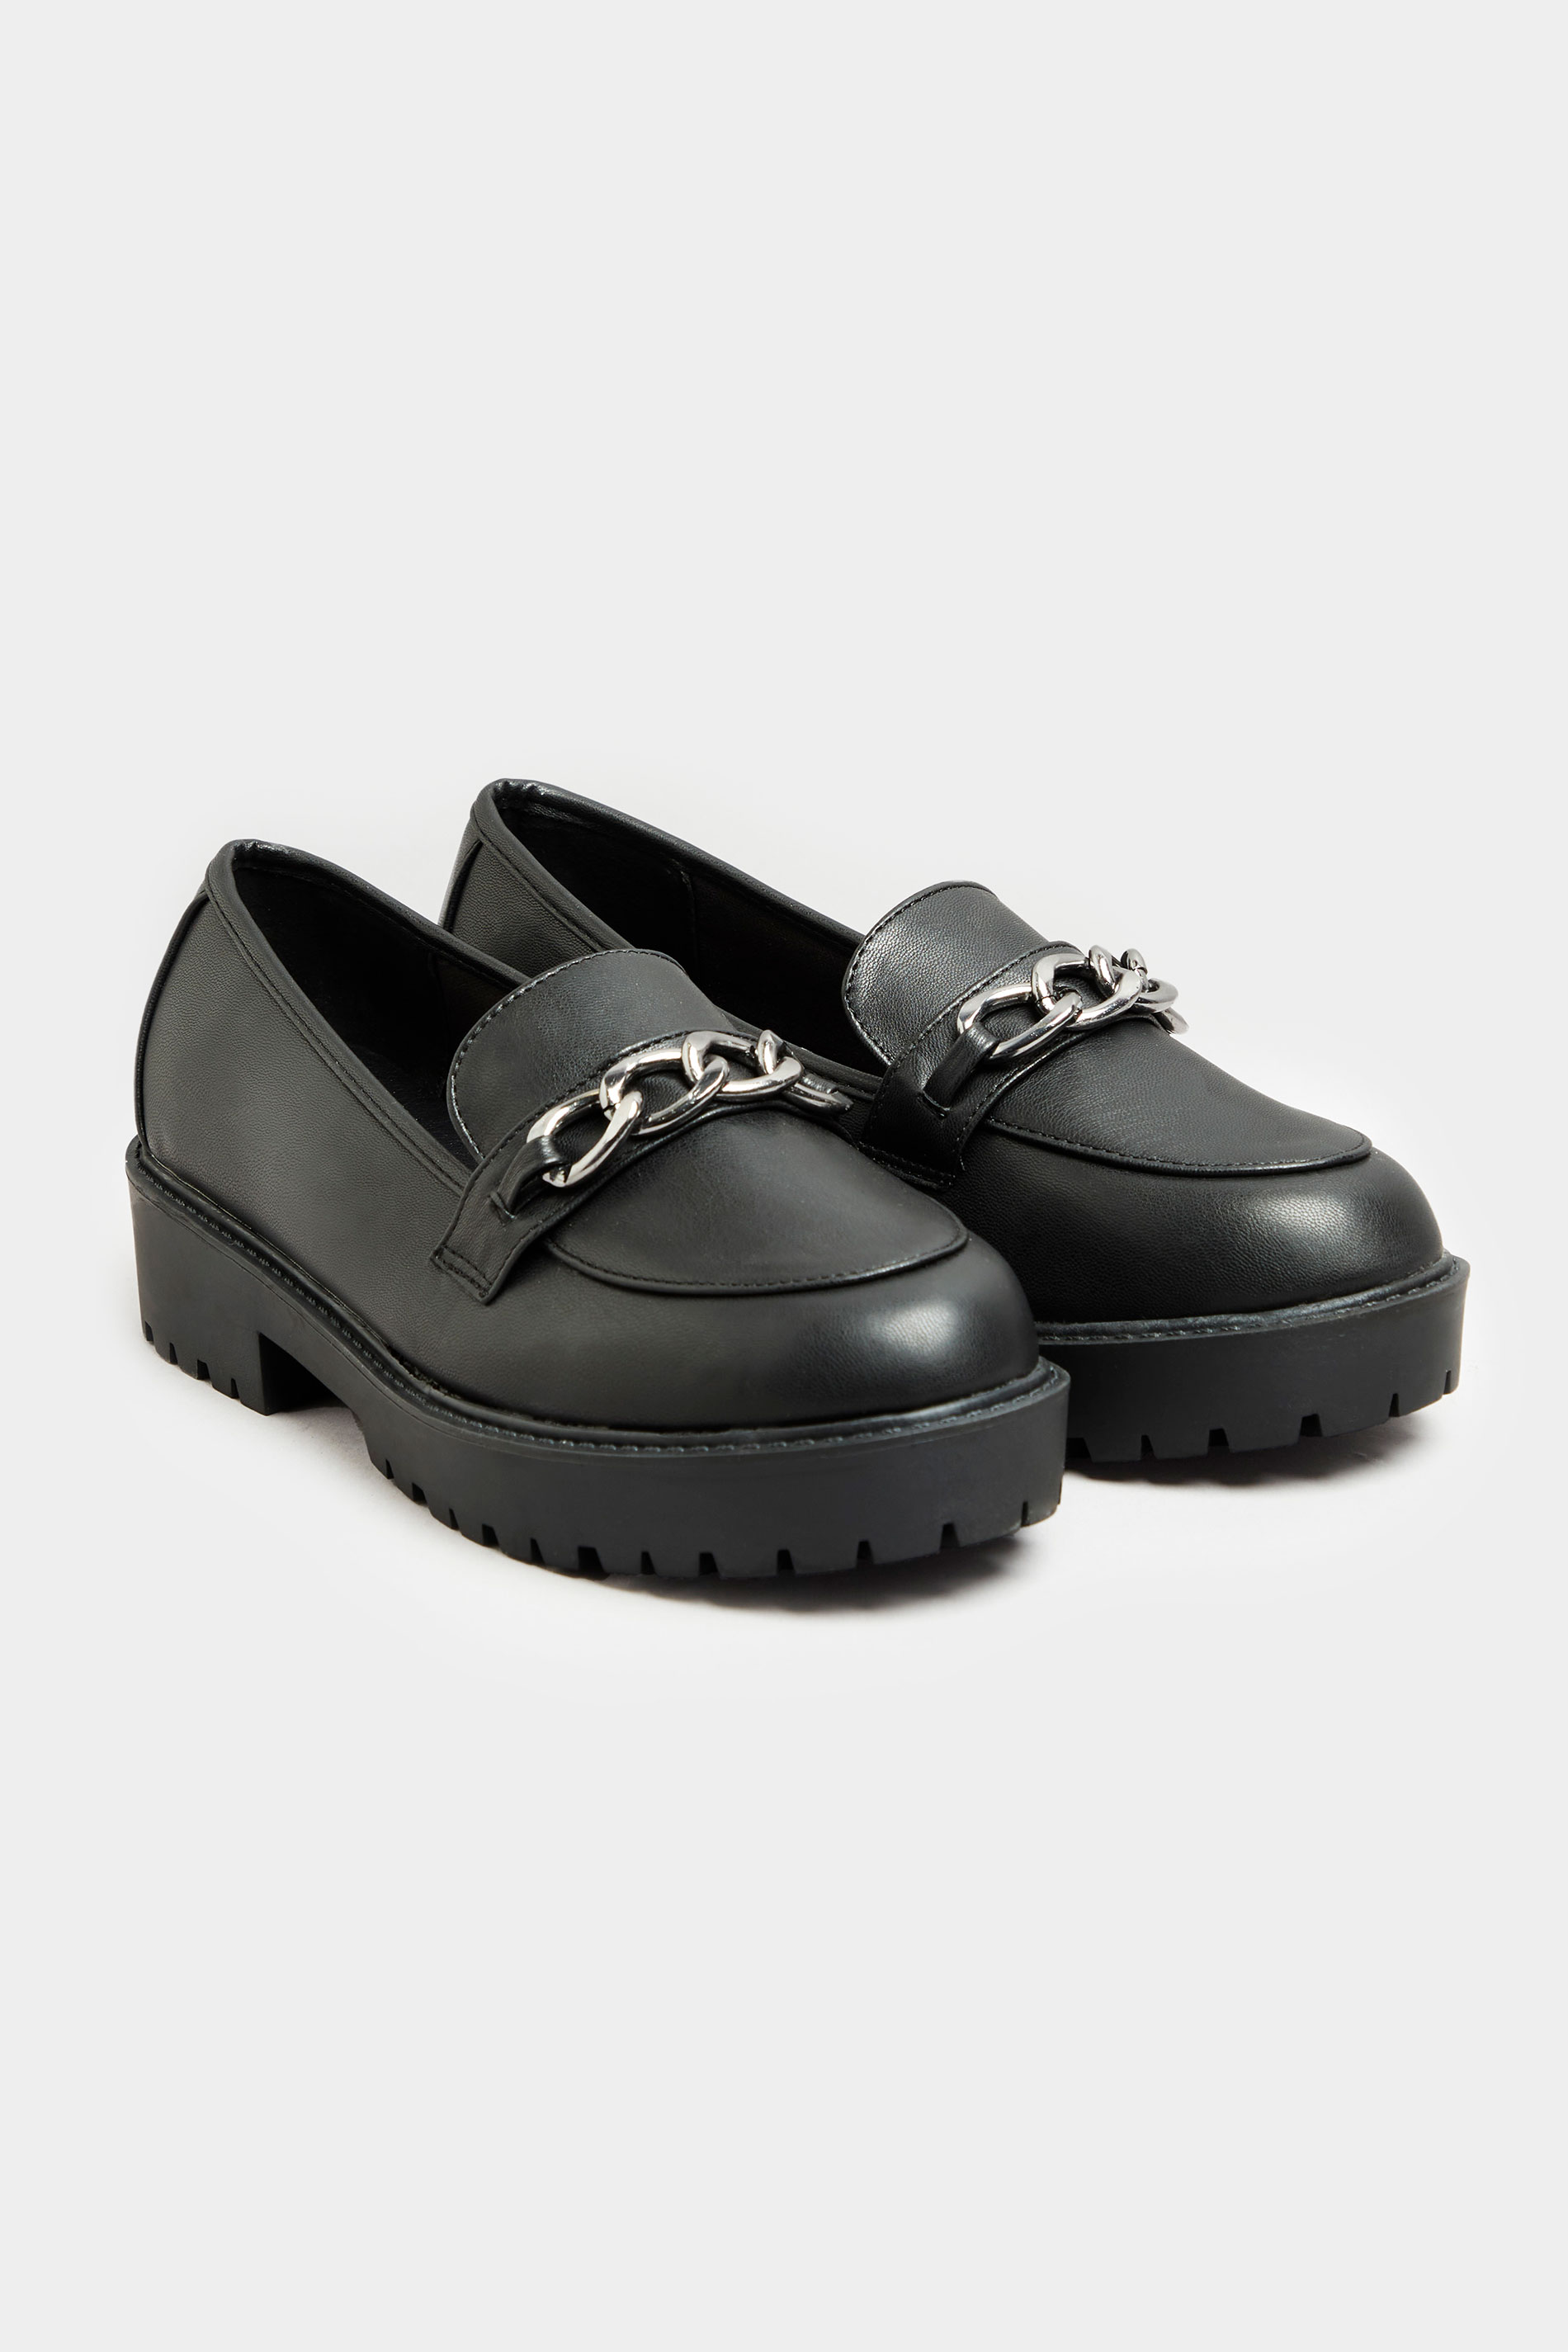 LIMITED COLLECTION Black Chunky Loafers In Extra Wide Fit_R.jpg